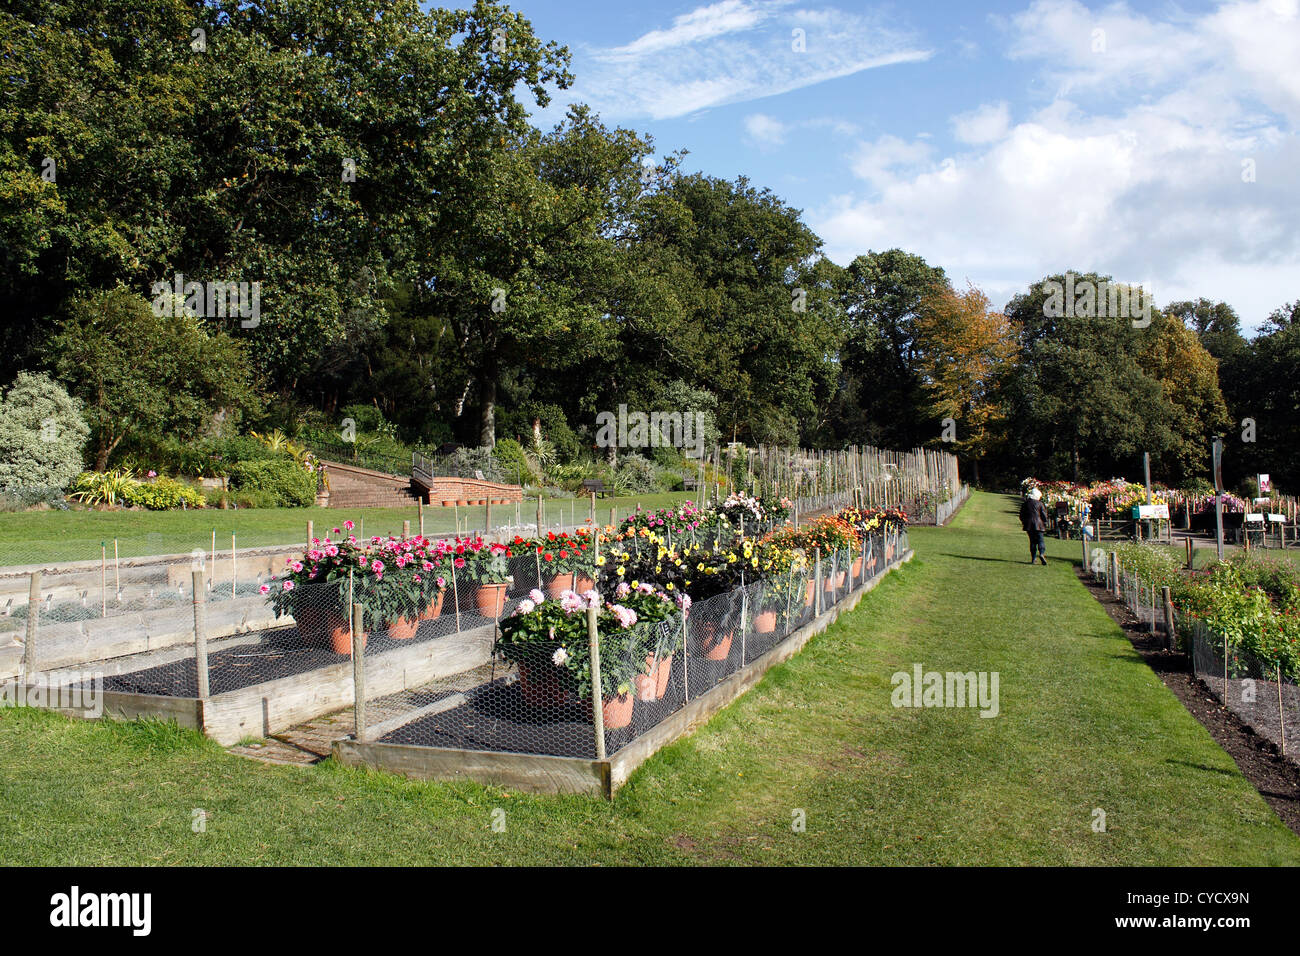 THE HORTICULTURAL TRIAL FIELDS OF RHS WISLEY. SURREY UK. Stock Photo